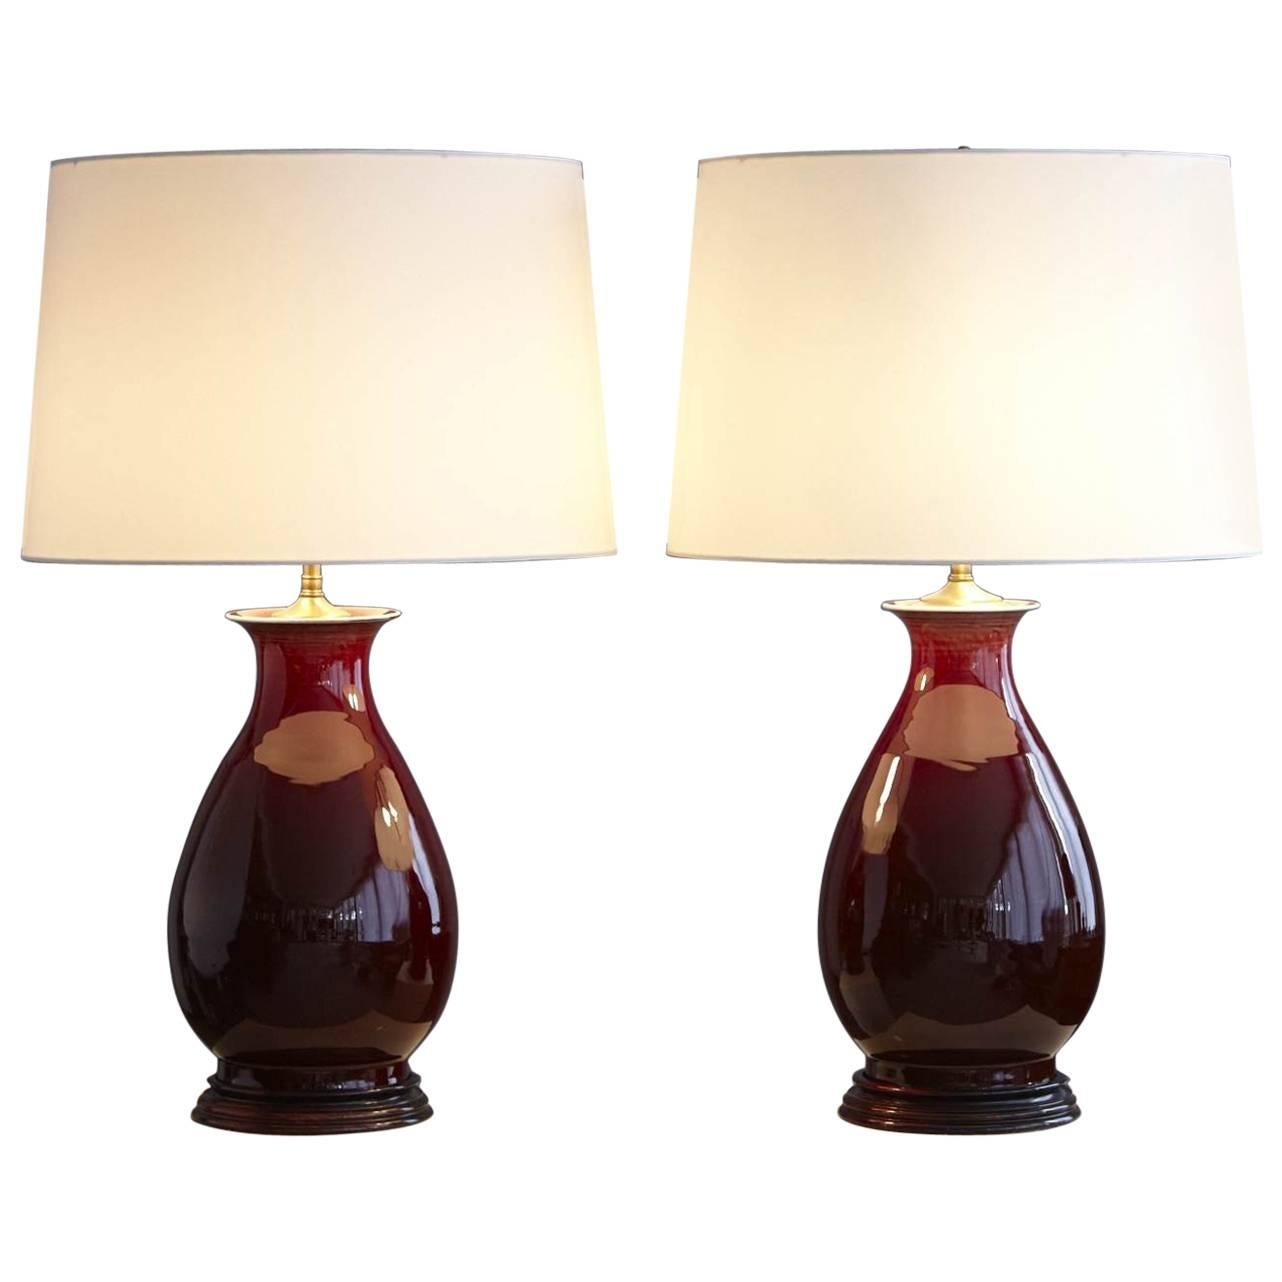 Pair of Deep Red Glazed Ceramic Lamps with New Ivory Shades, Height Adjustable